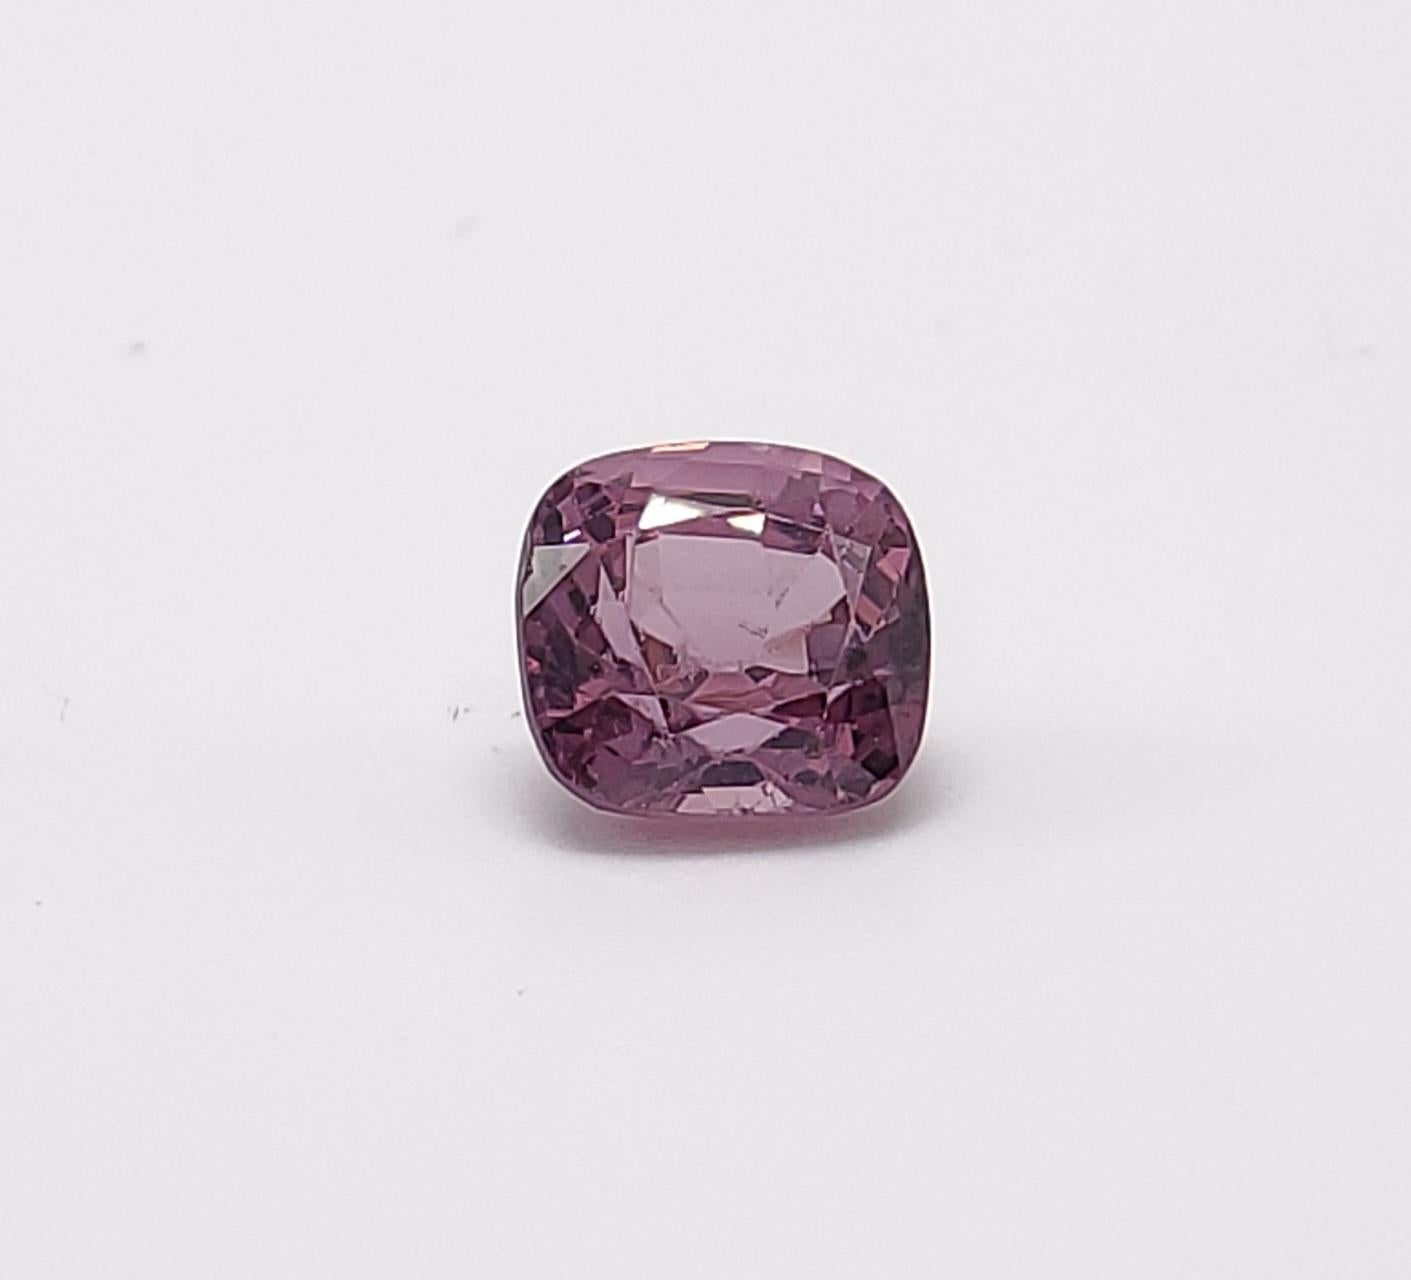 This pretty Purple-Pink spinel  Cushion cut , weighs 1.79 carats and would make a beautiful 3-stone ring, though its shape lends itself to a variety of possibilities! It measures 6.80 x 6.45 x 4.79 millimeters, is eye clean, brilliant, and